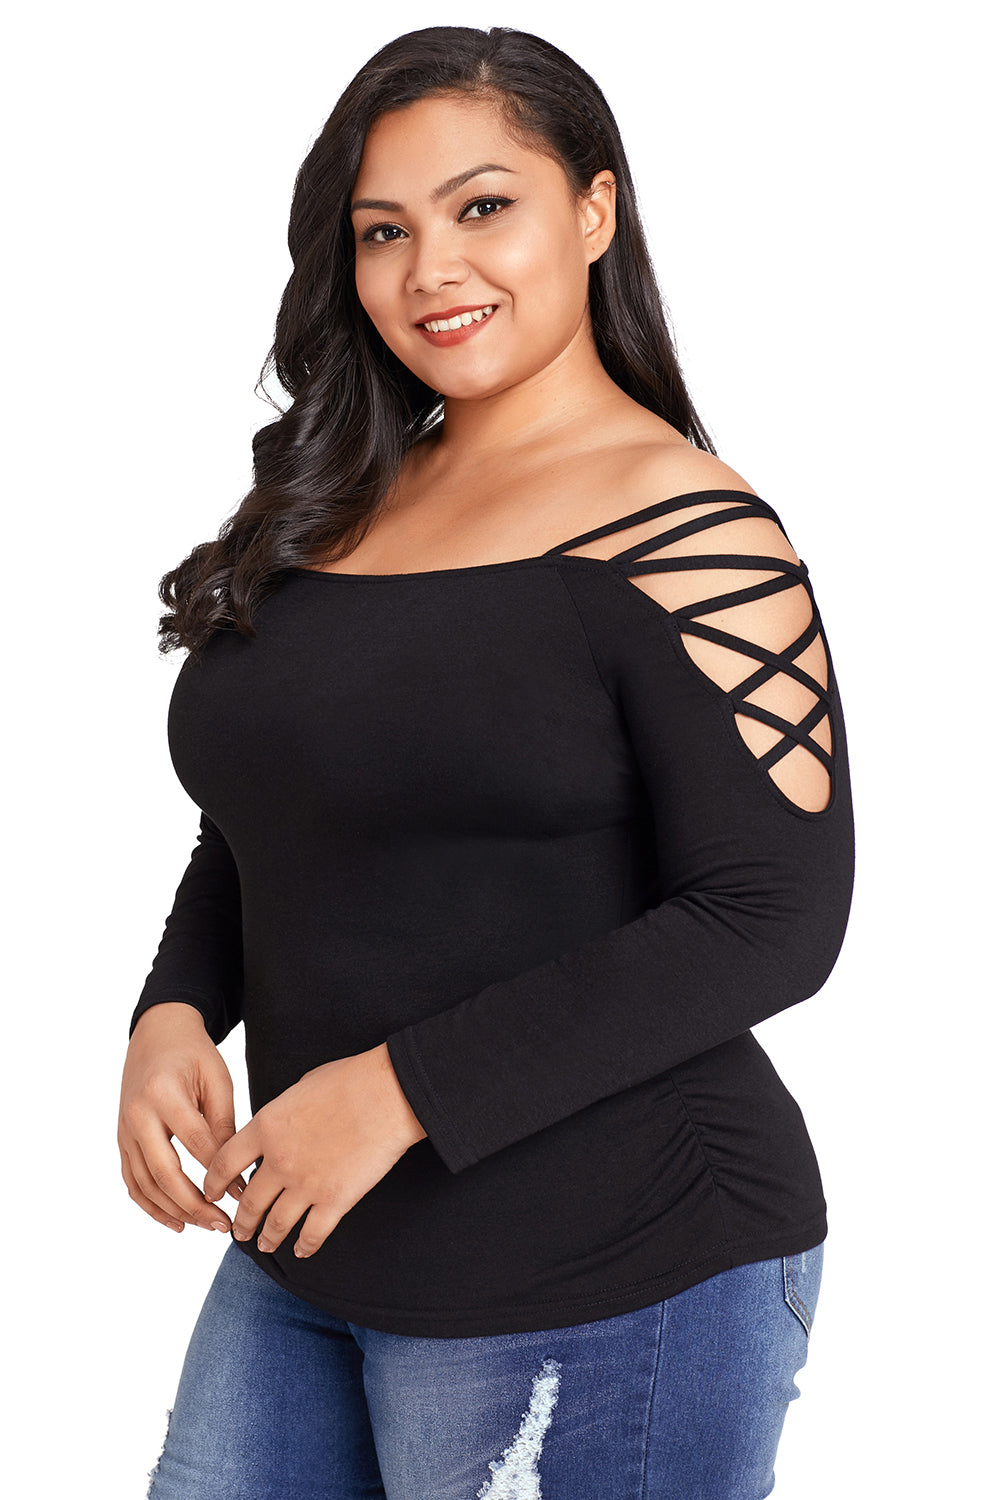 Sexy Black Strappy Crisscross Cold Shoulder Plus Size Top – SEXY